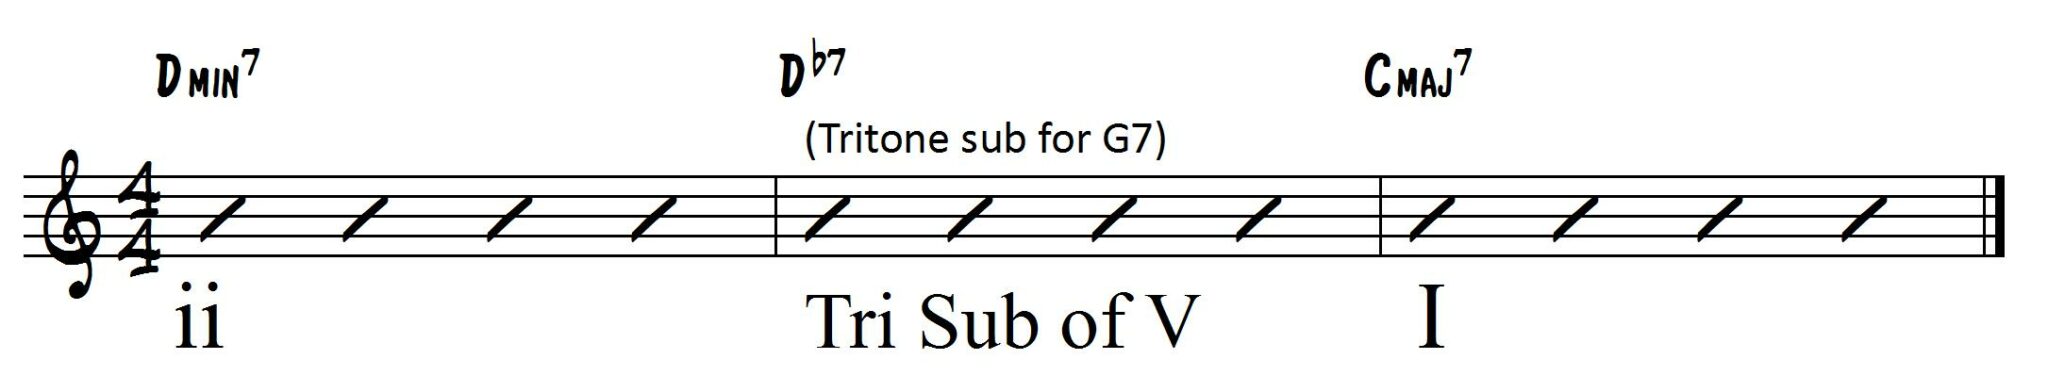 Tritone Substitution Chart